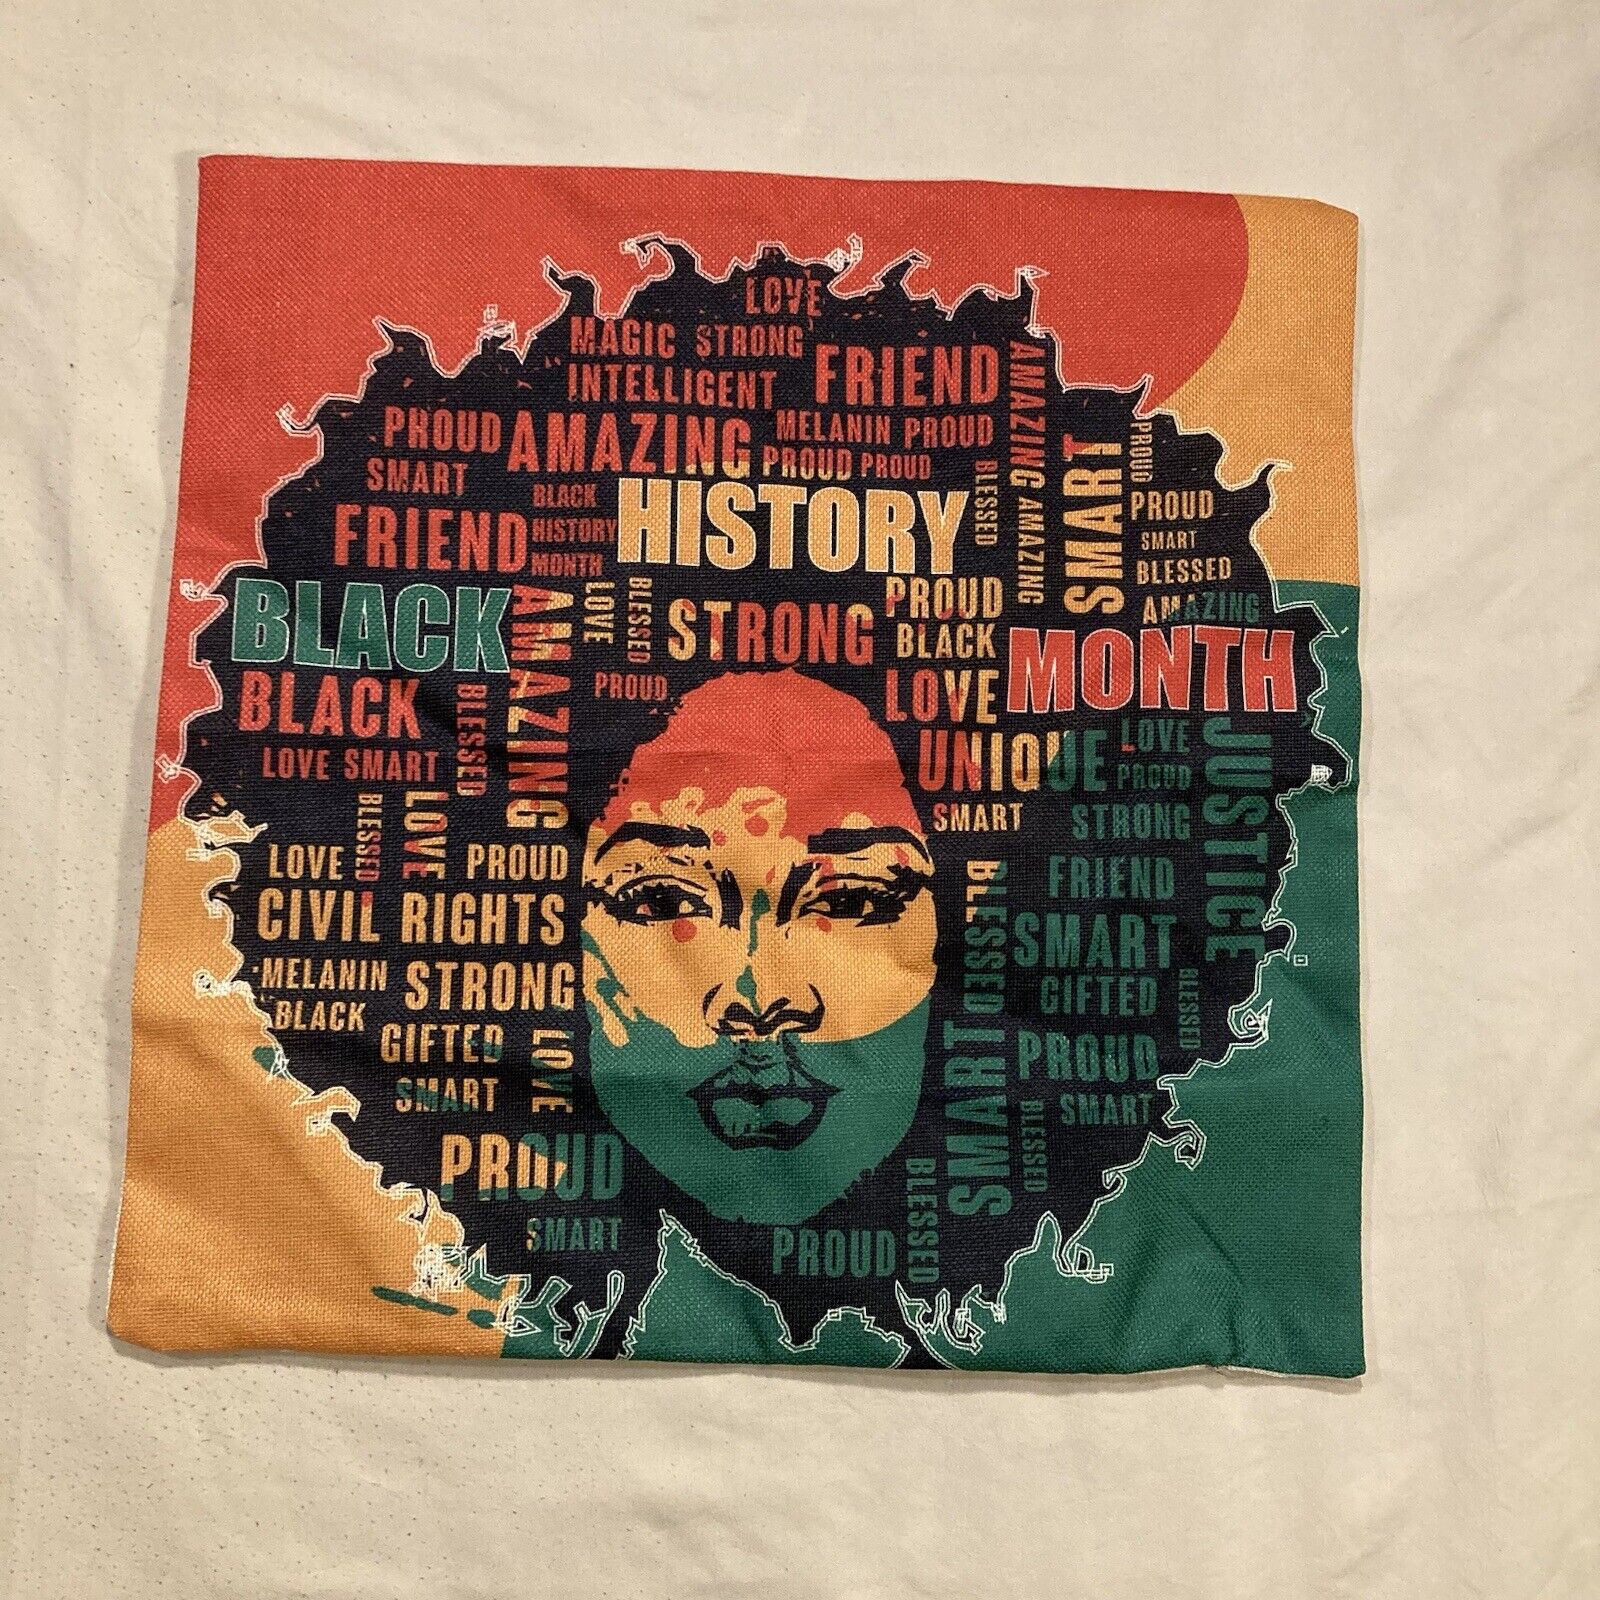 Black History Month Pillowcase Woman Afro Art & Lettering Colorful Canvas 18”